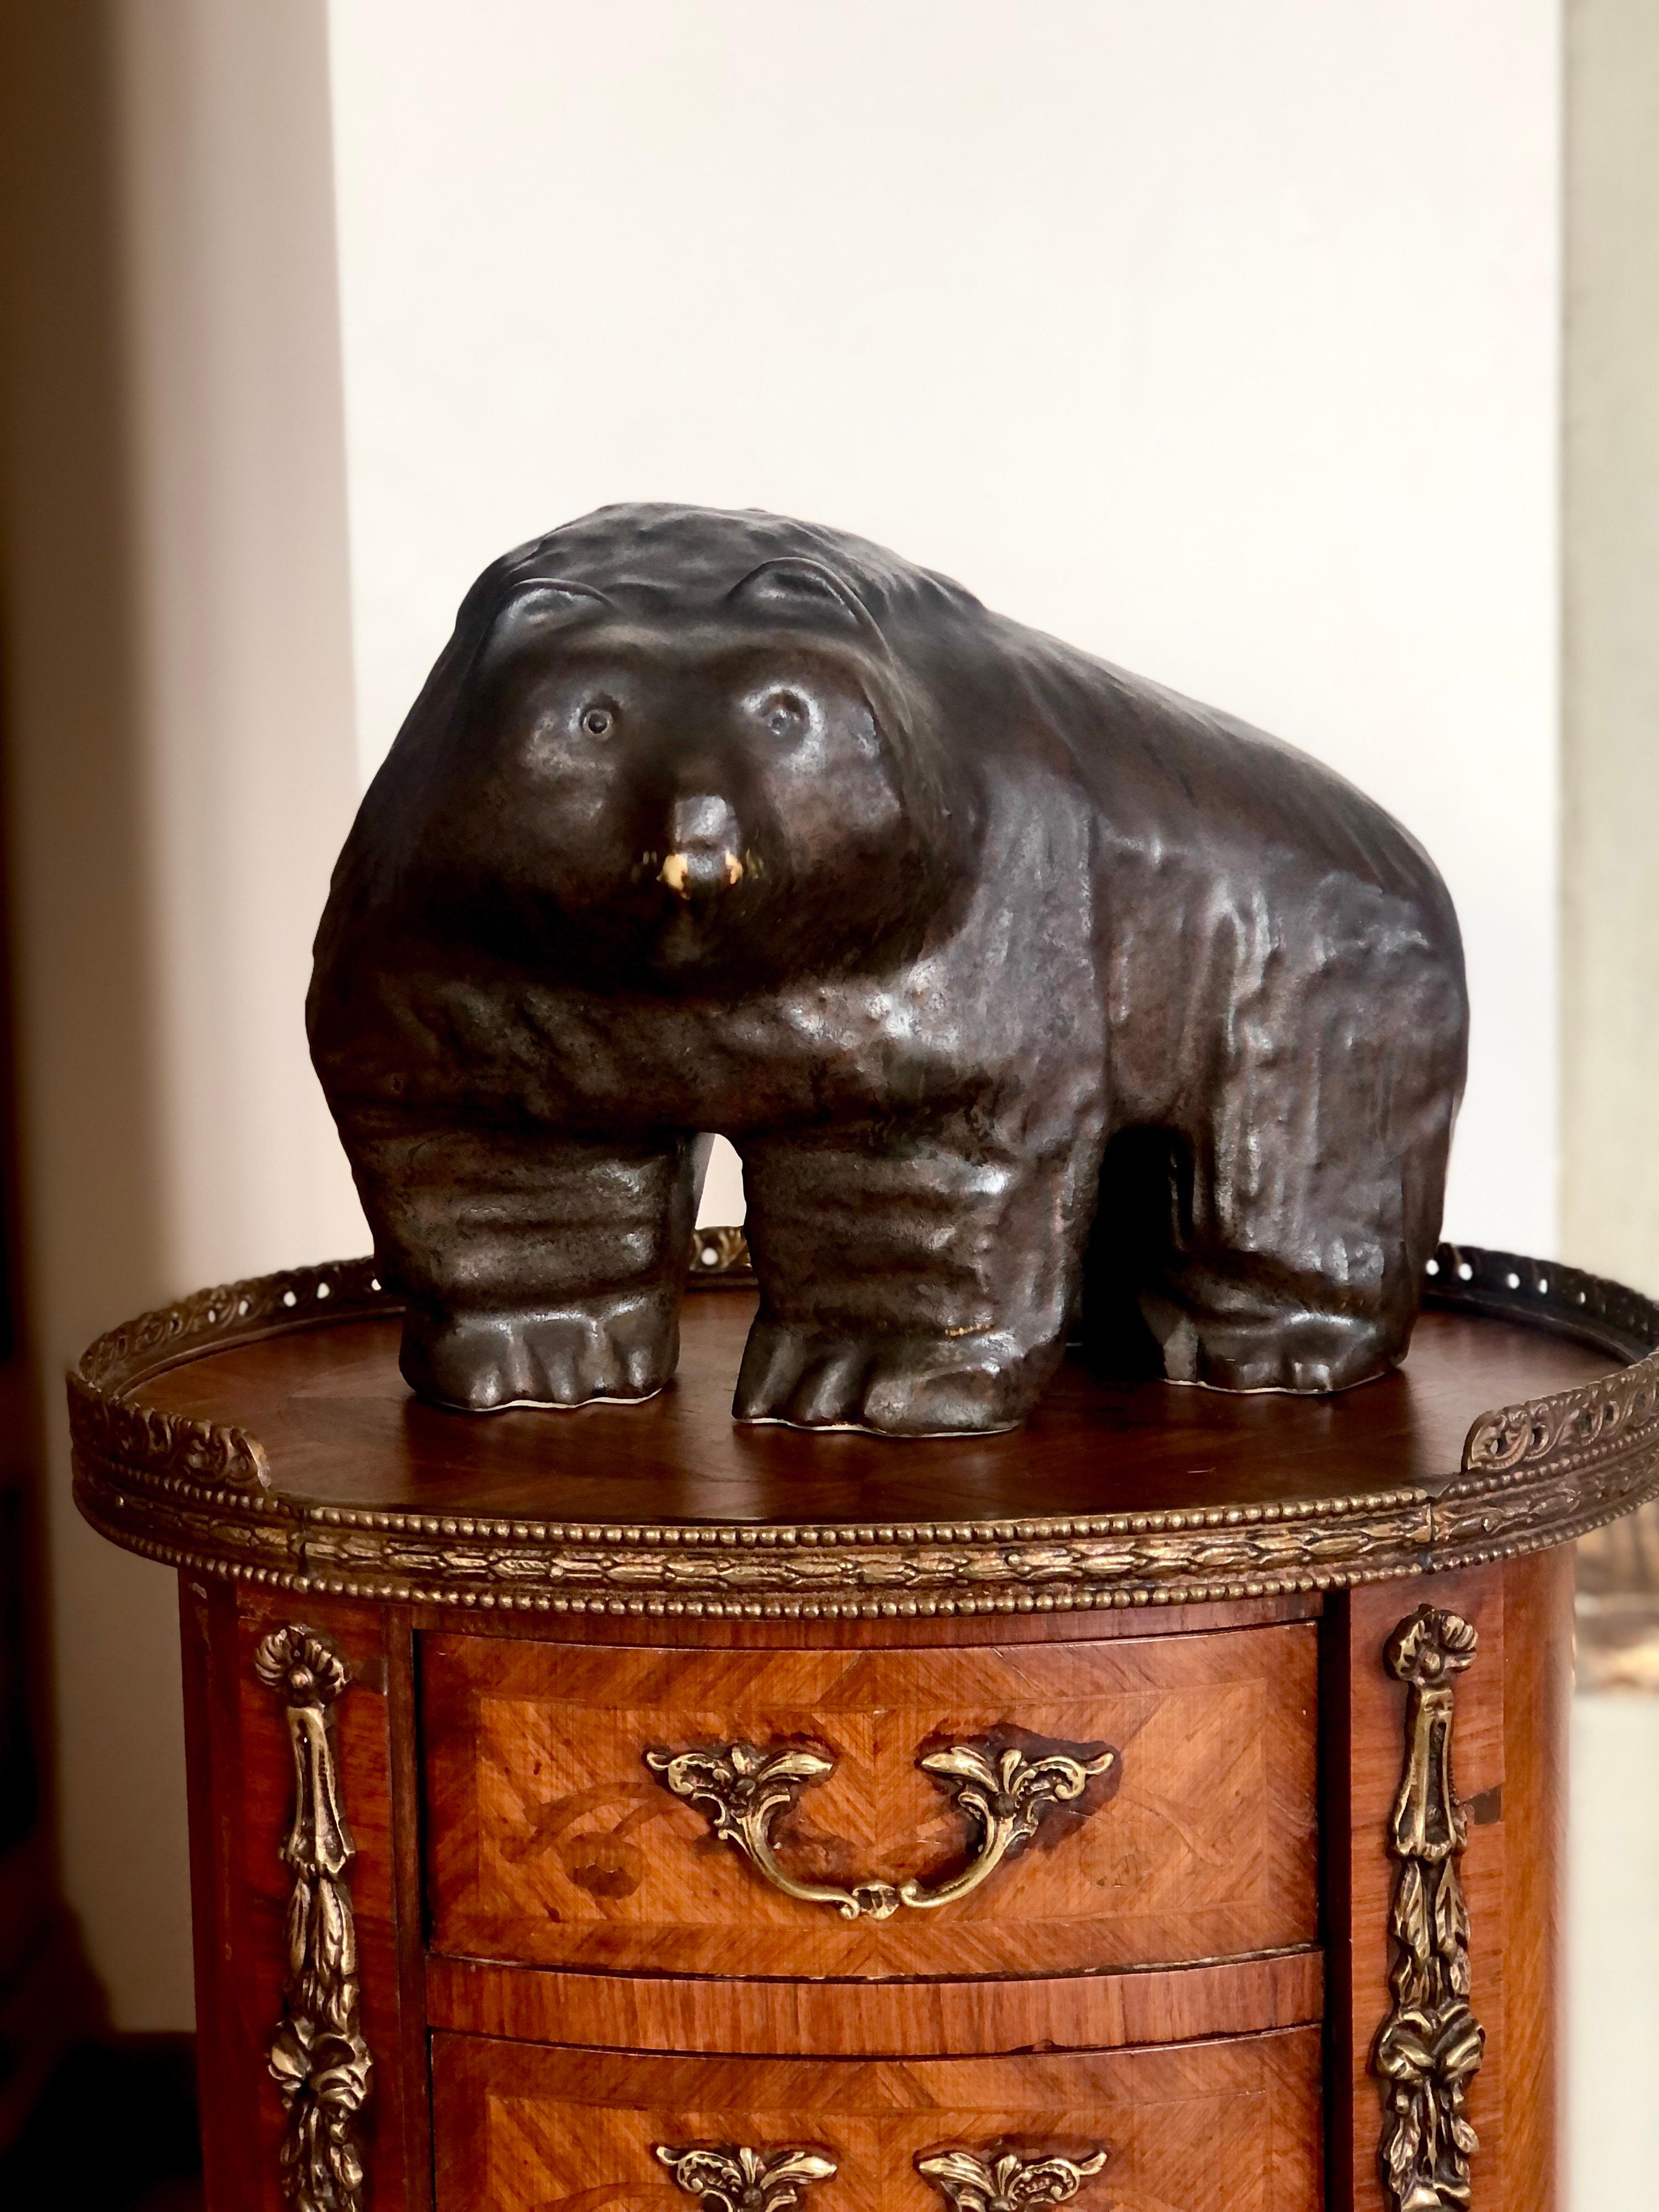 1960s Finnish brown bear sculpture in glazed ceramic by Taisto Kaasinen for Arabia.
Signed by the artist under the front paw.
Perfect condition.
Finland.